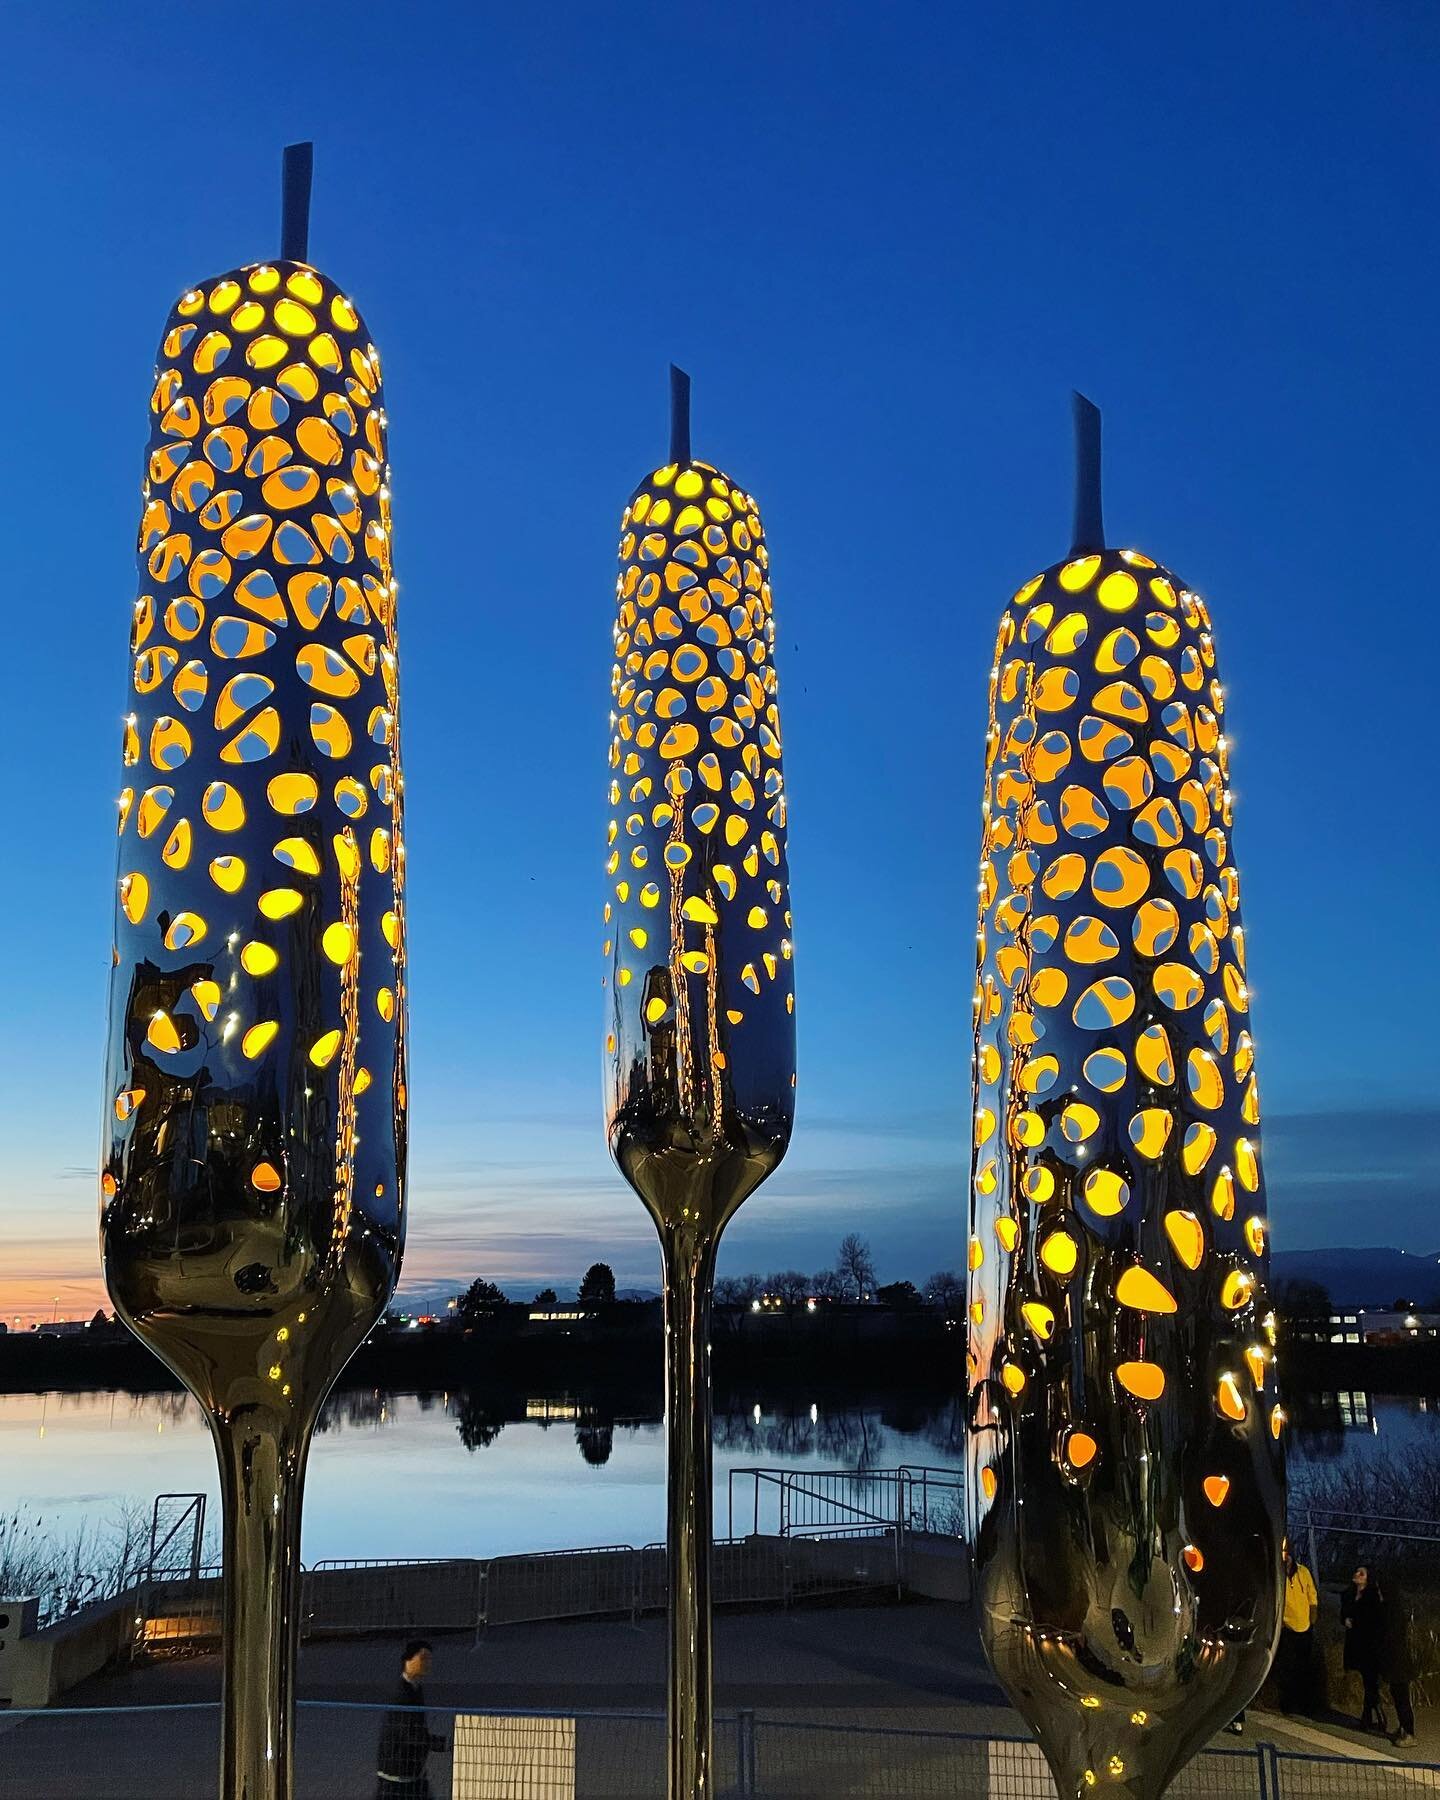 Richmond&rsquo;s newest public artwork, Typha, by artists Charlotte Wall (@charlotte.wall.works) and Puya Khalili (@puya.khalili), was officially unveiled last week near the Richmond Olympic Oval.
&nbsp;
Composed of three shiny sculptural forms that 